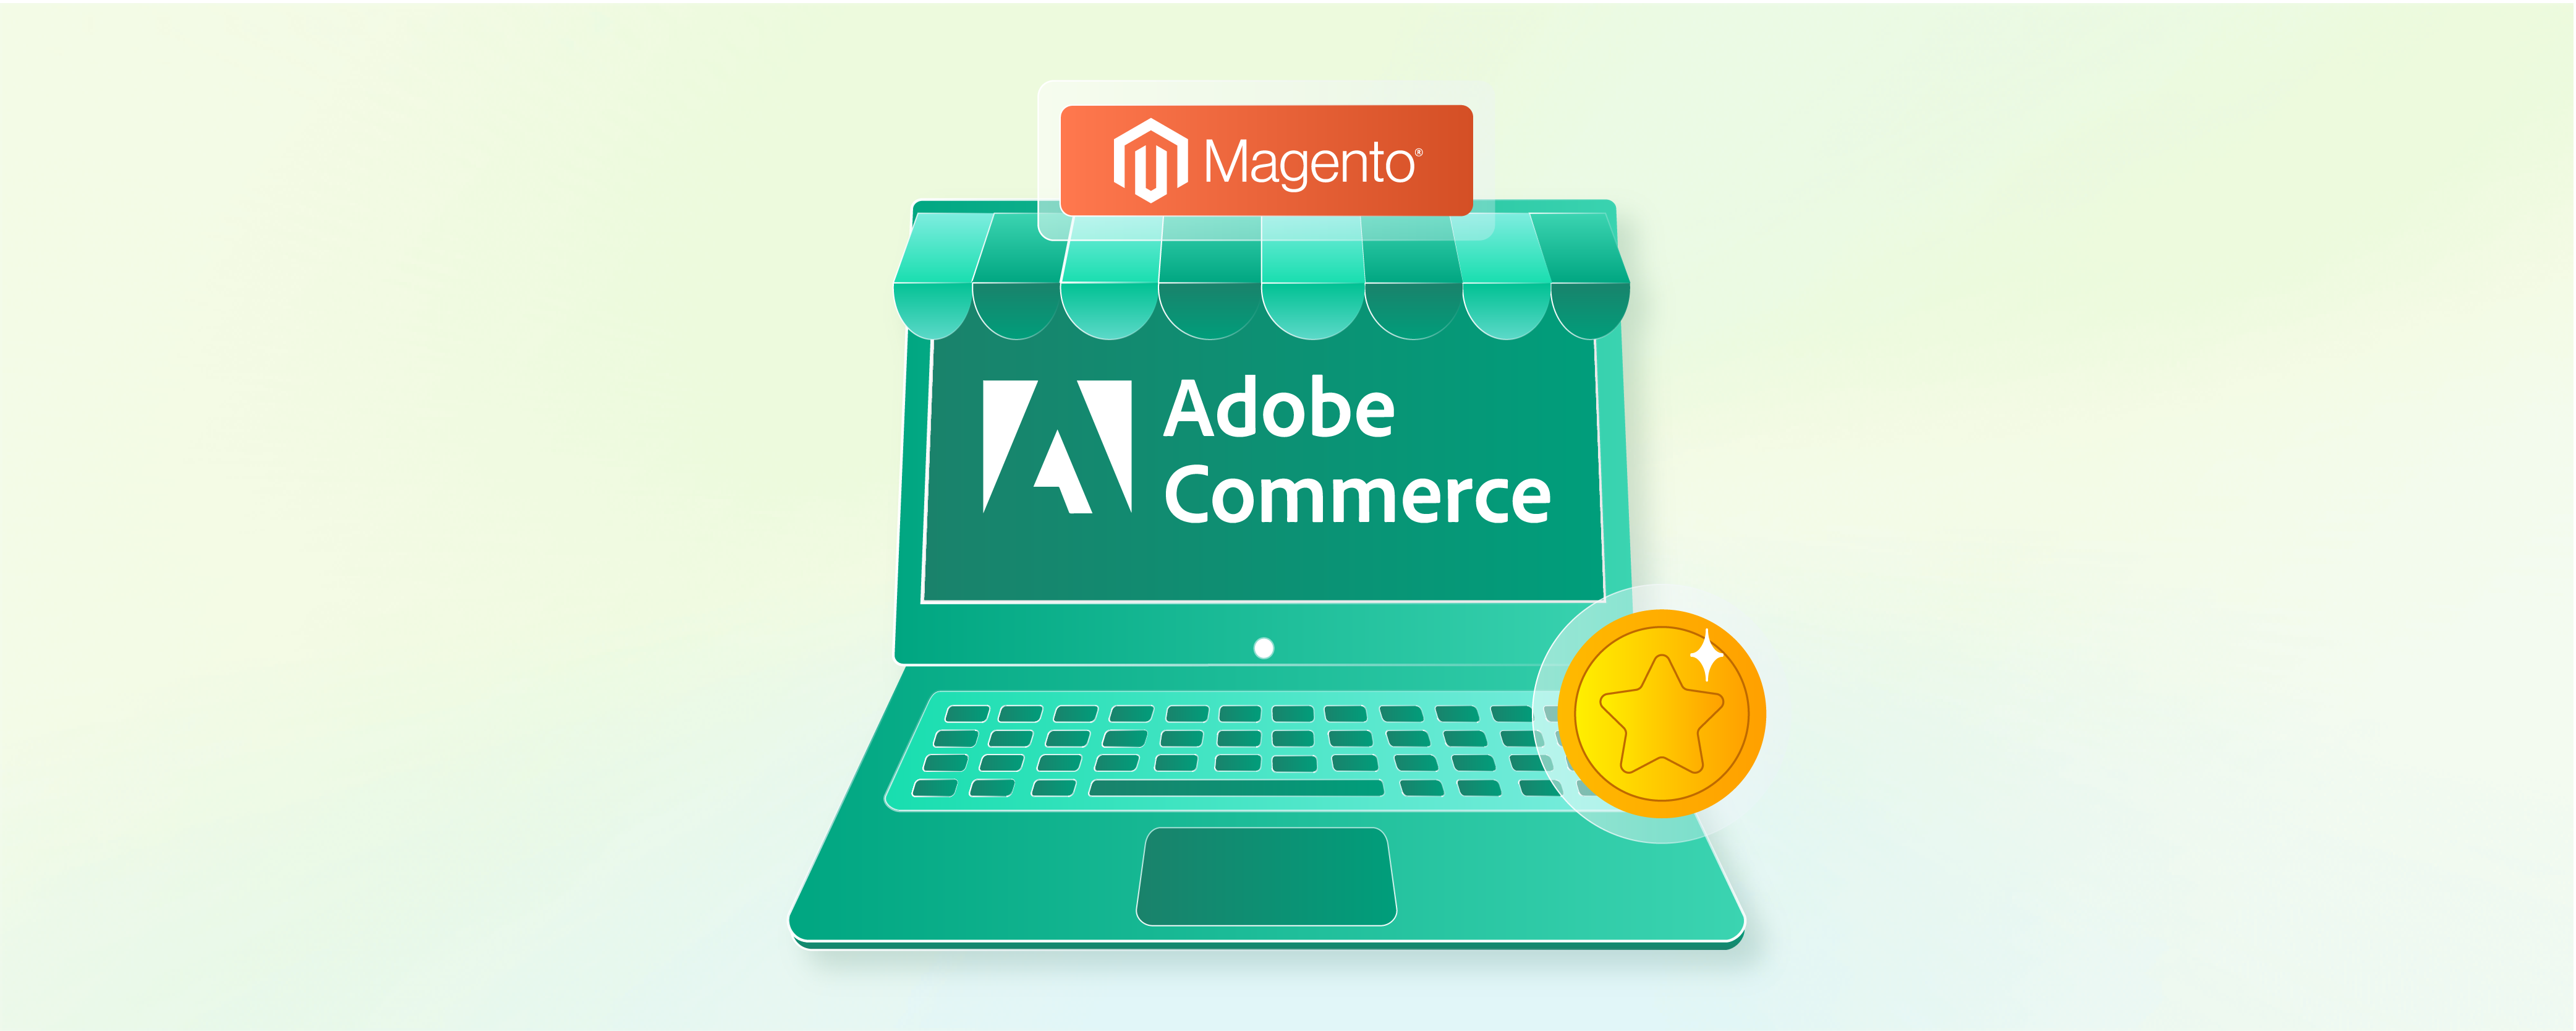 How Do You Configure Magento Reward Points in Adobe Commerce?